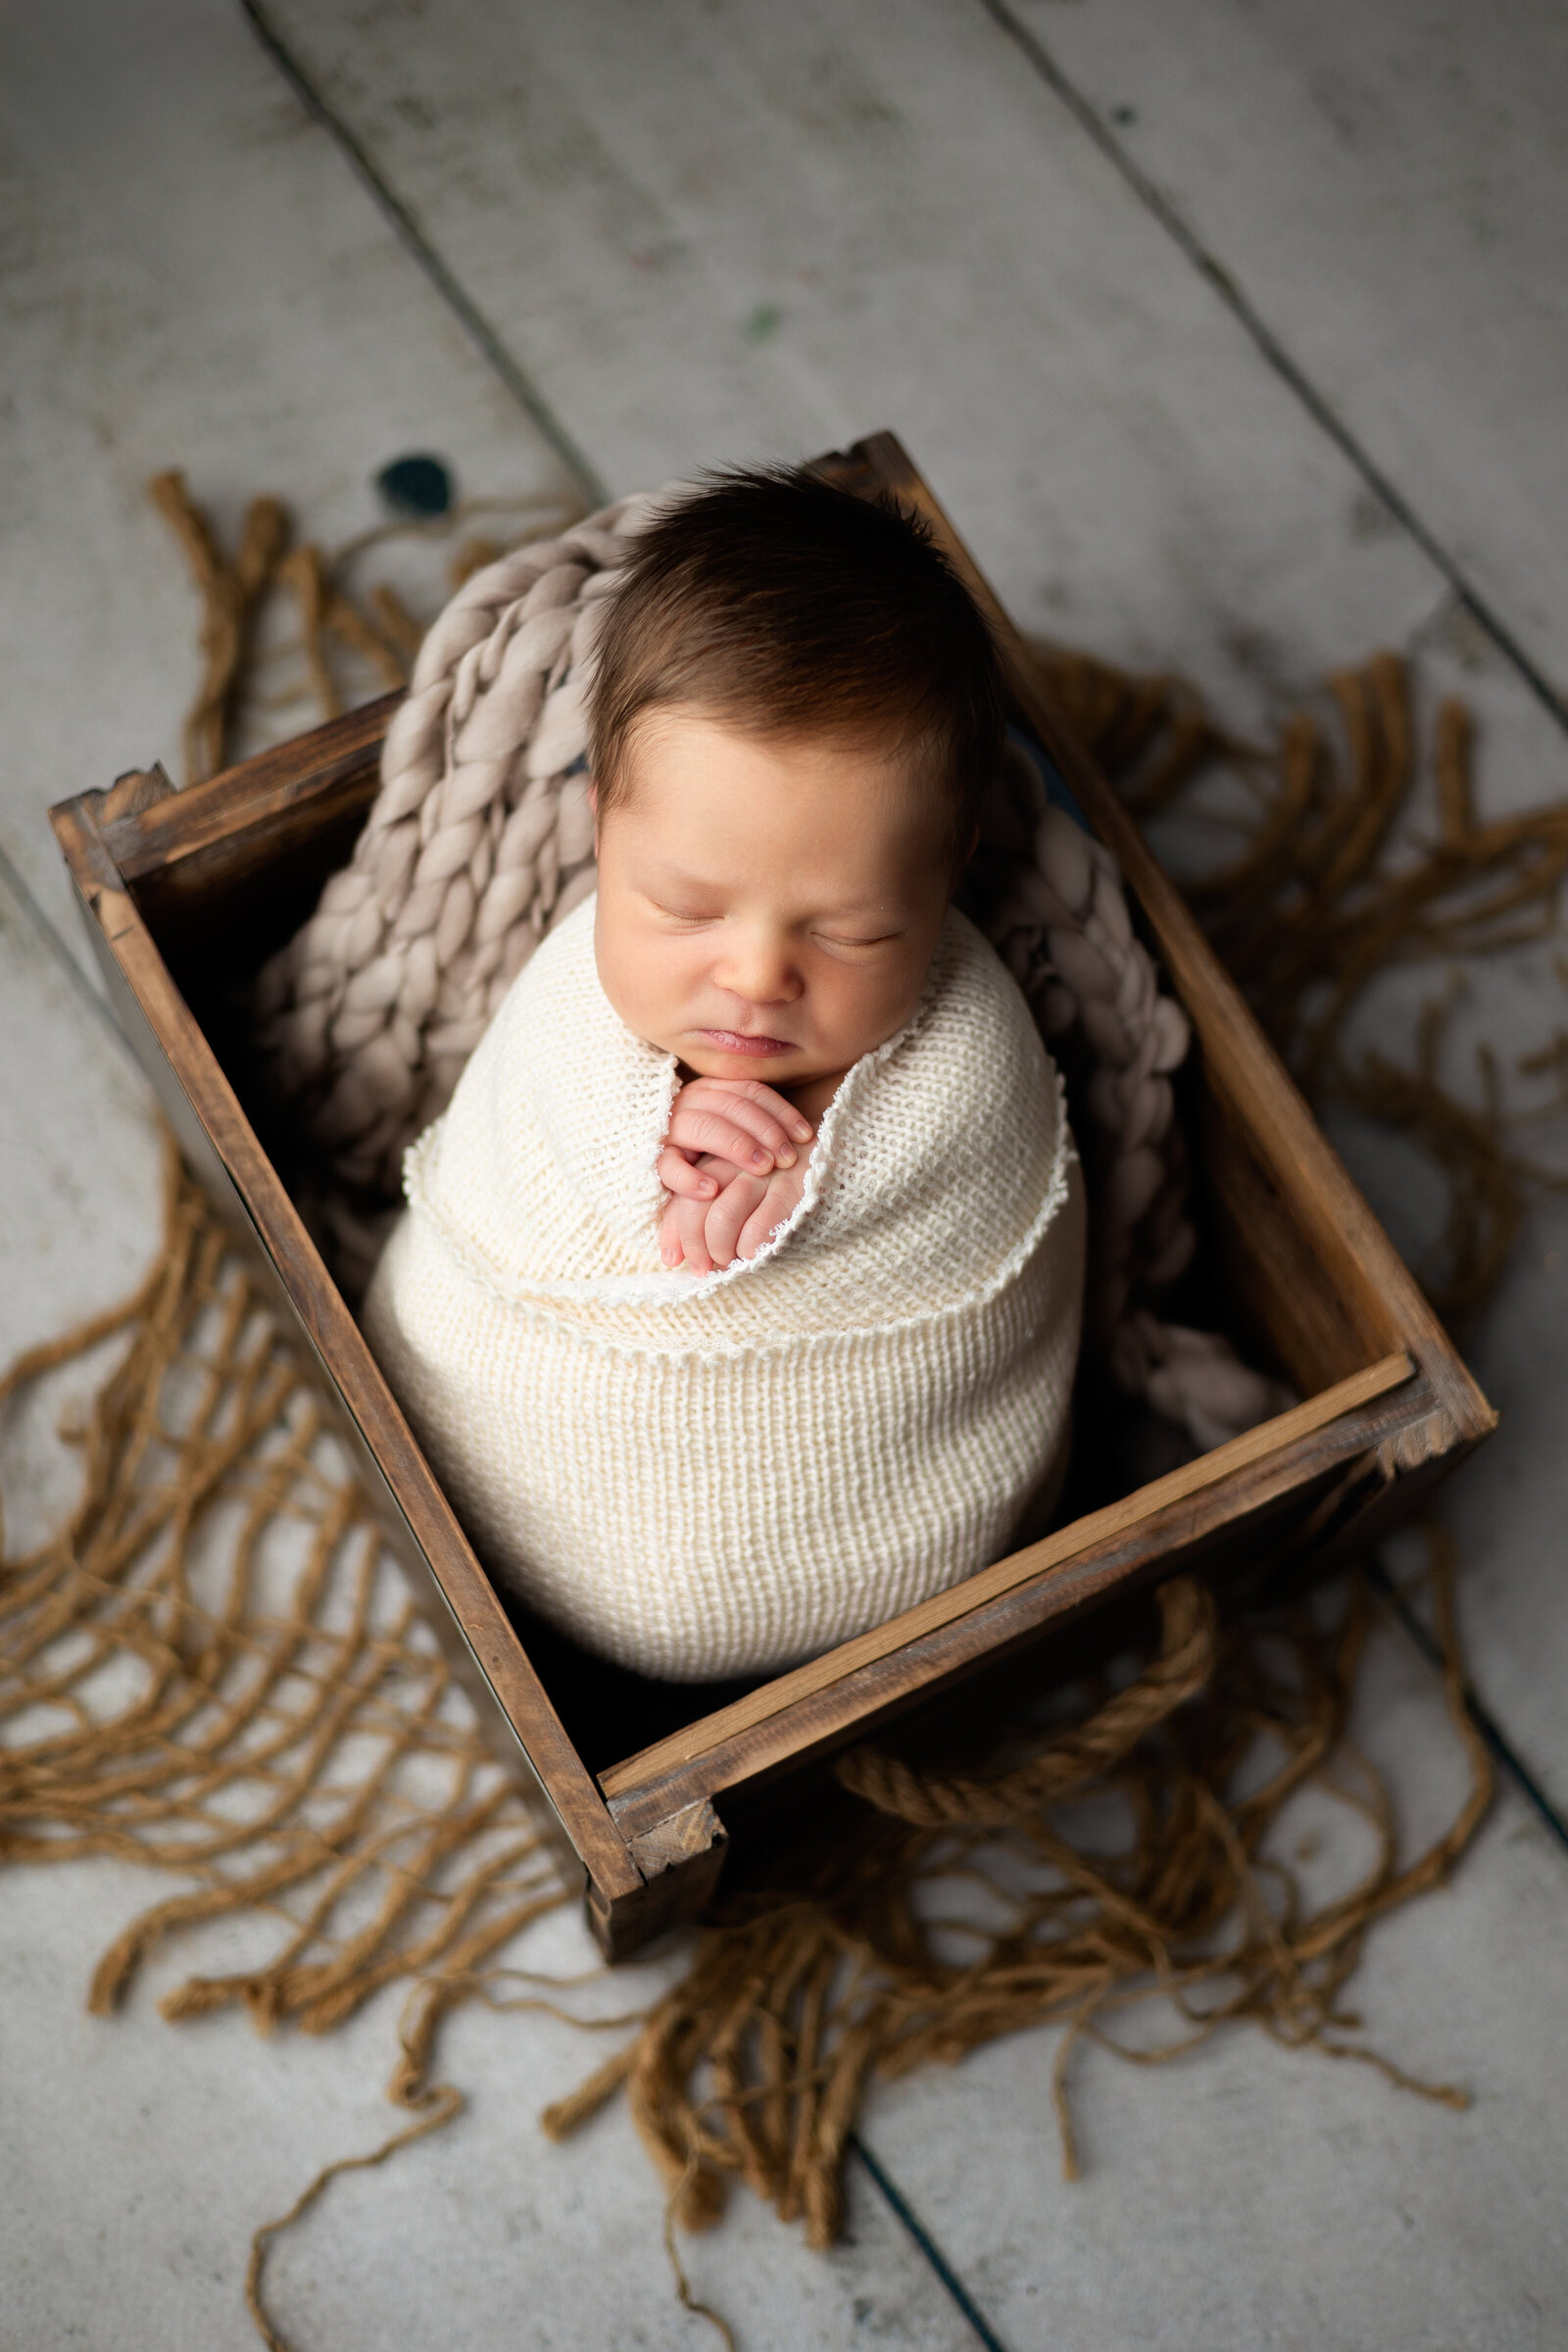 Newborn boy swaddled in a cream wrap and posed in a wooden crate